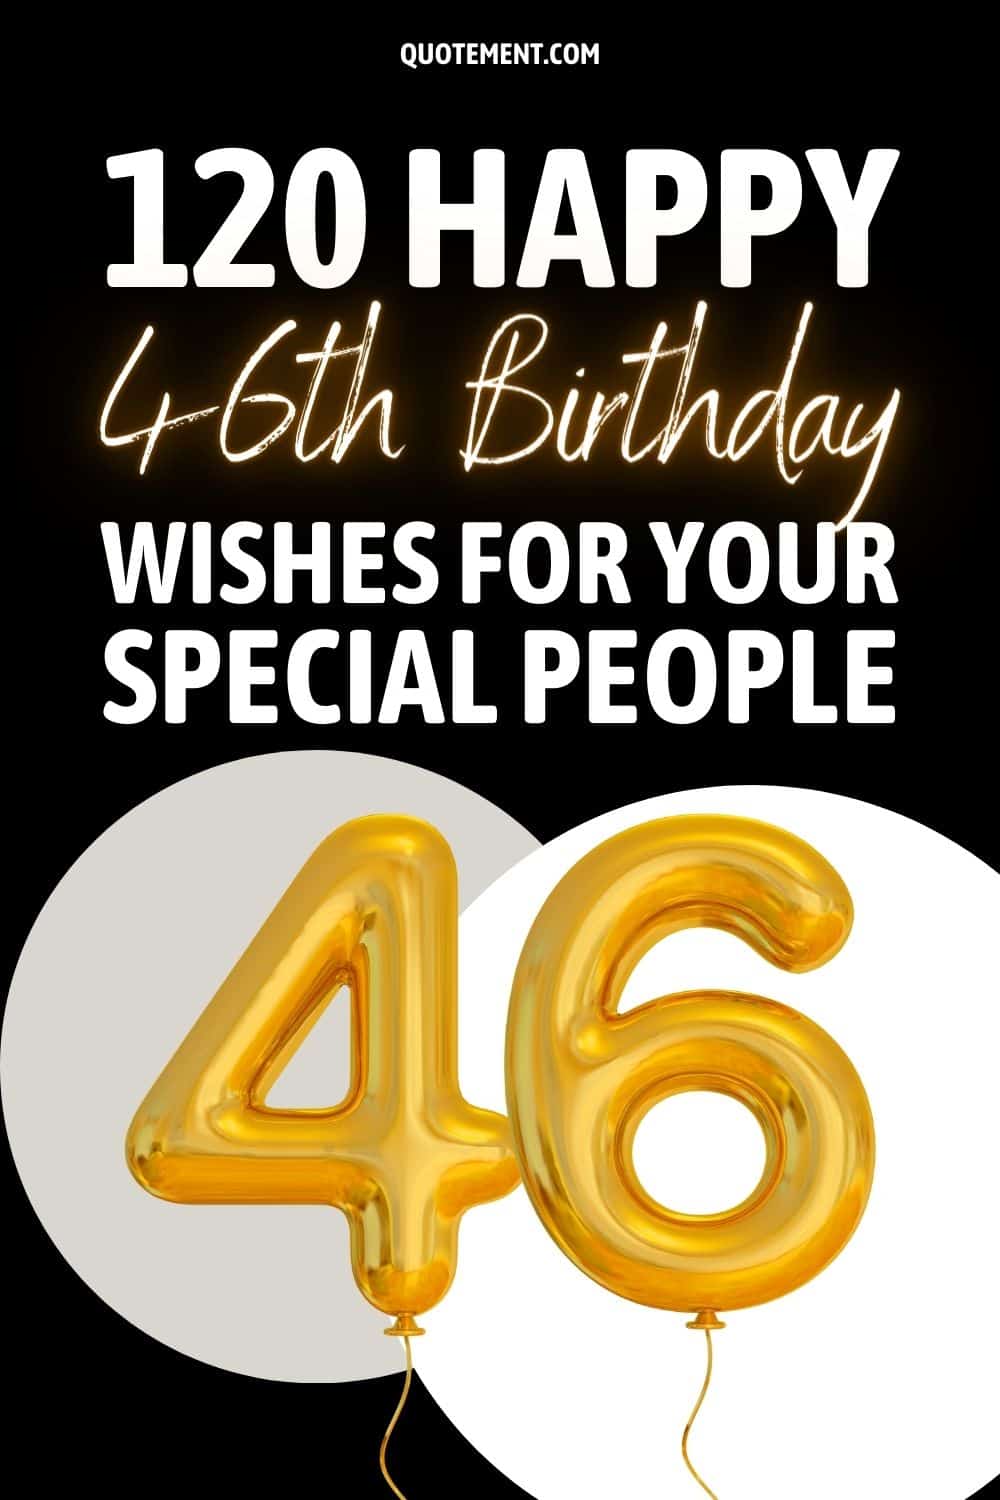 120 Happy 46th Birthday Wishes For Your Special People
